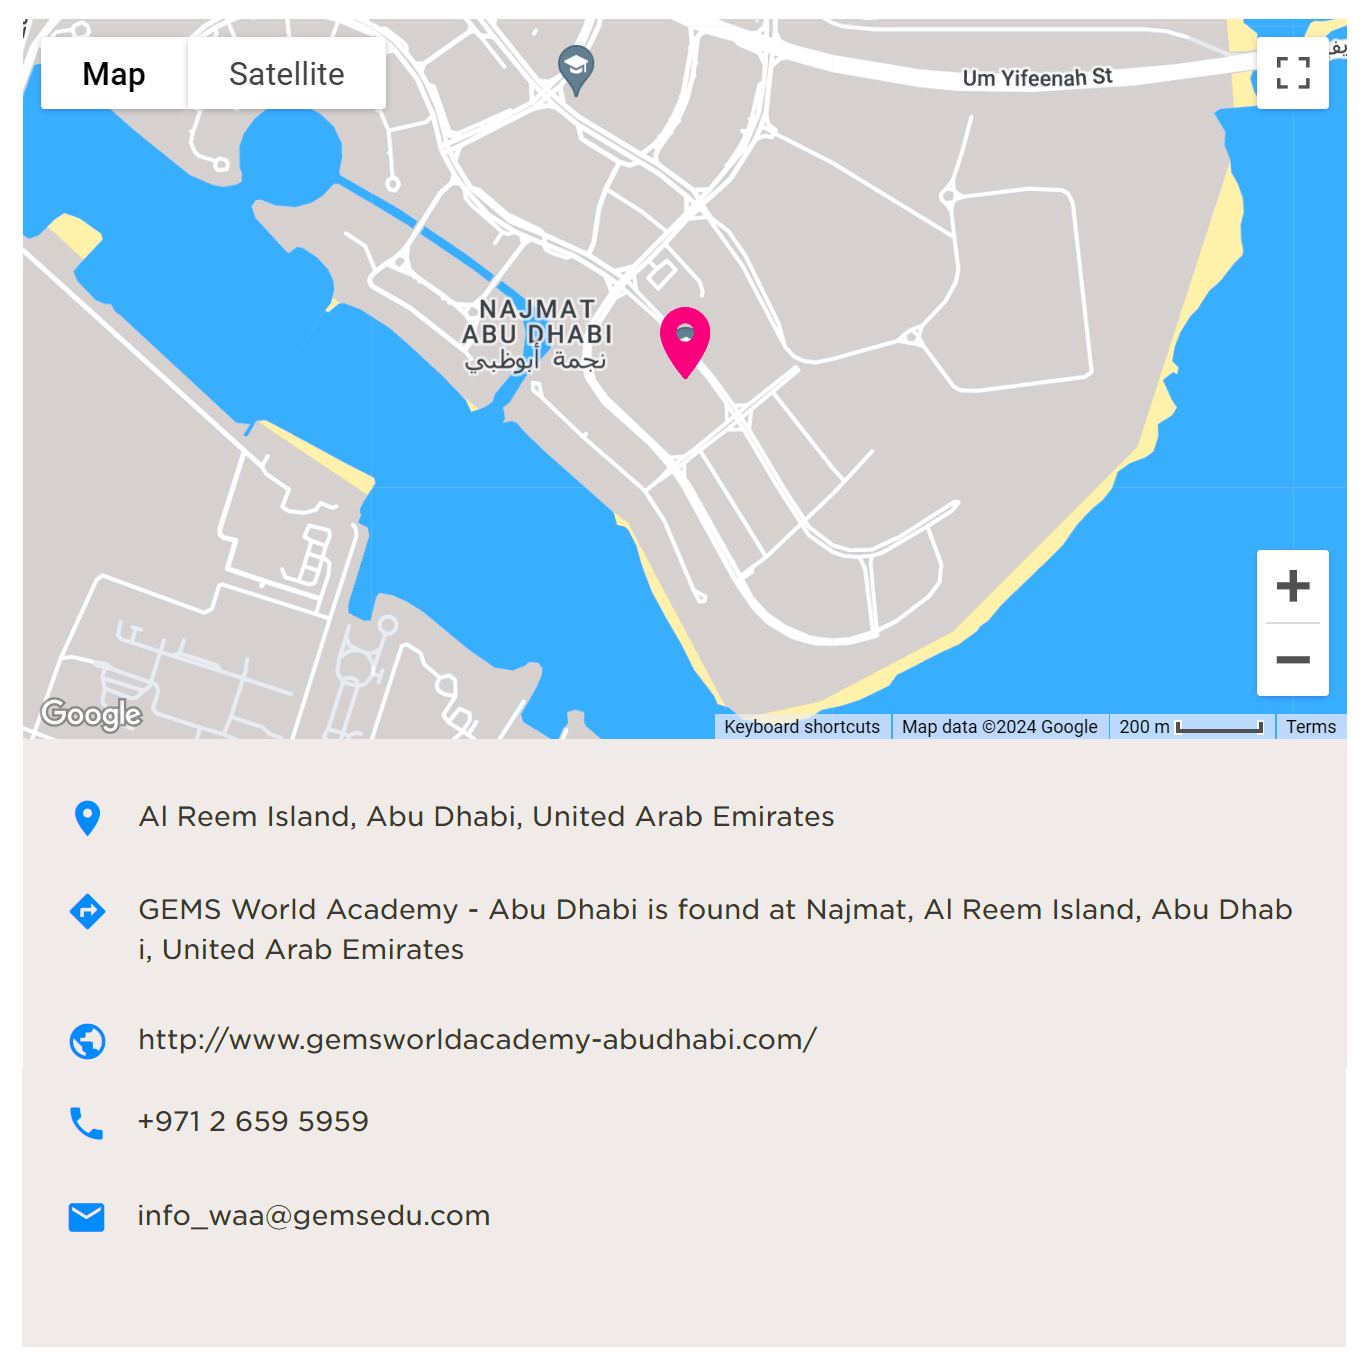 Map showing Directions to GEMS World Academy Abu Dhabi